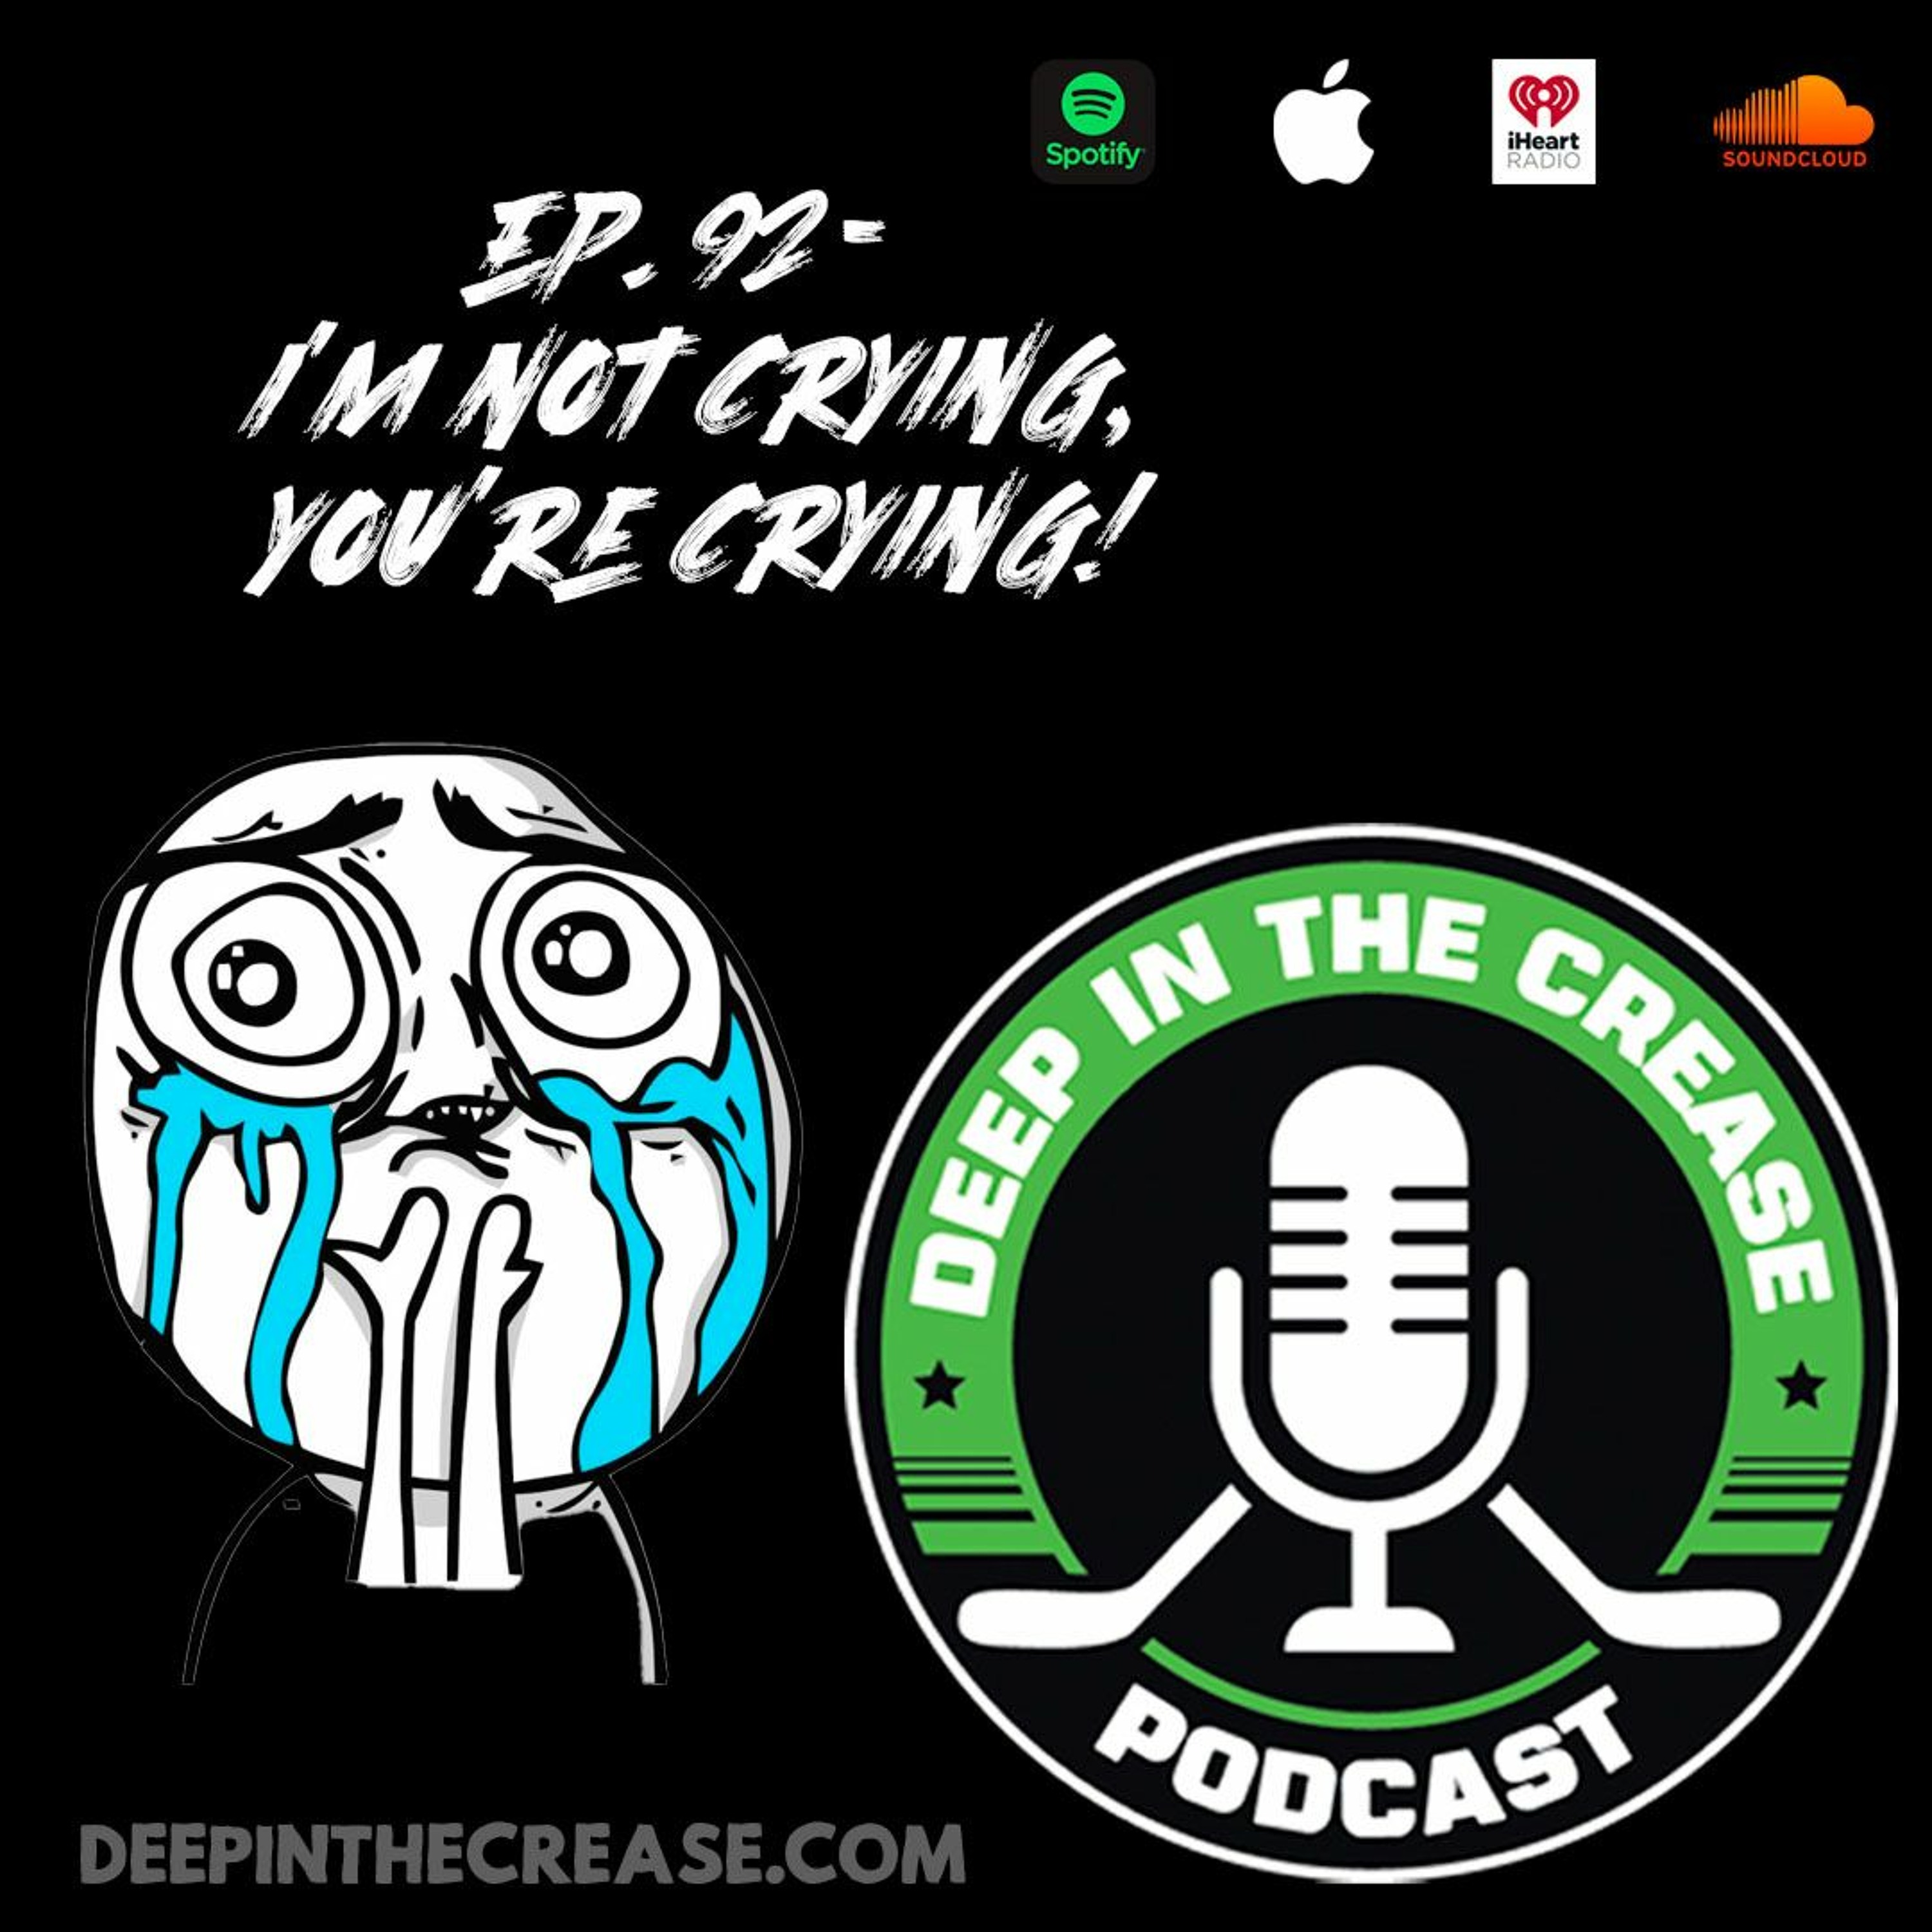 Episode 92 - I'm Not Crying, You're Crying!